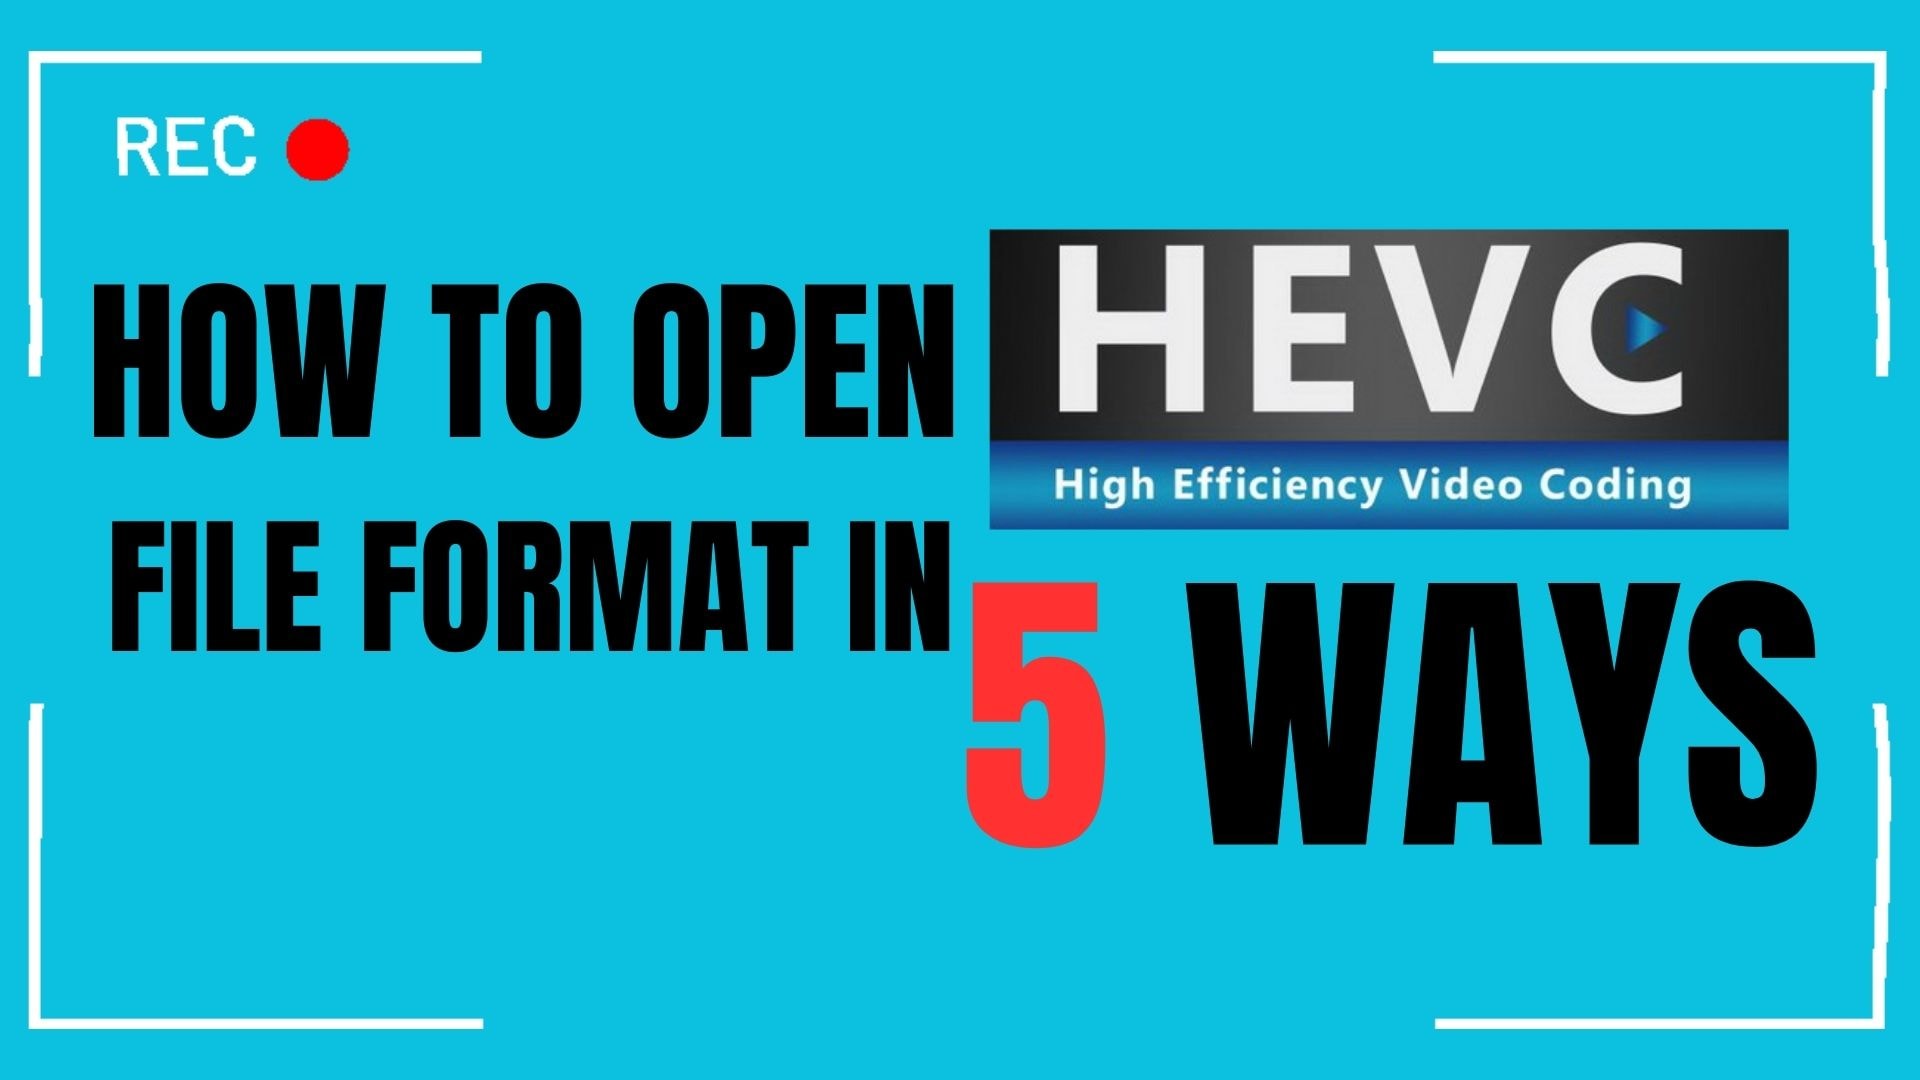 How to Open HEVC File Format in 5 Ways